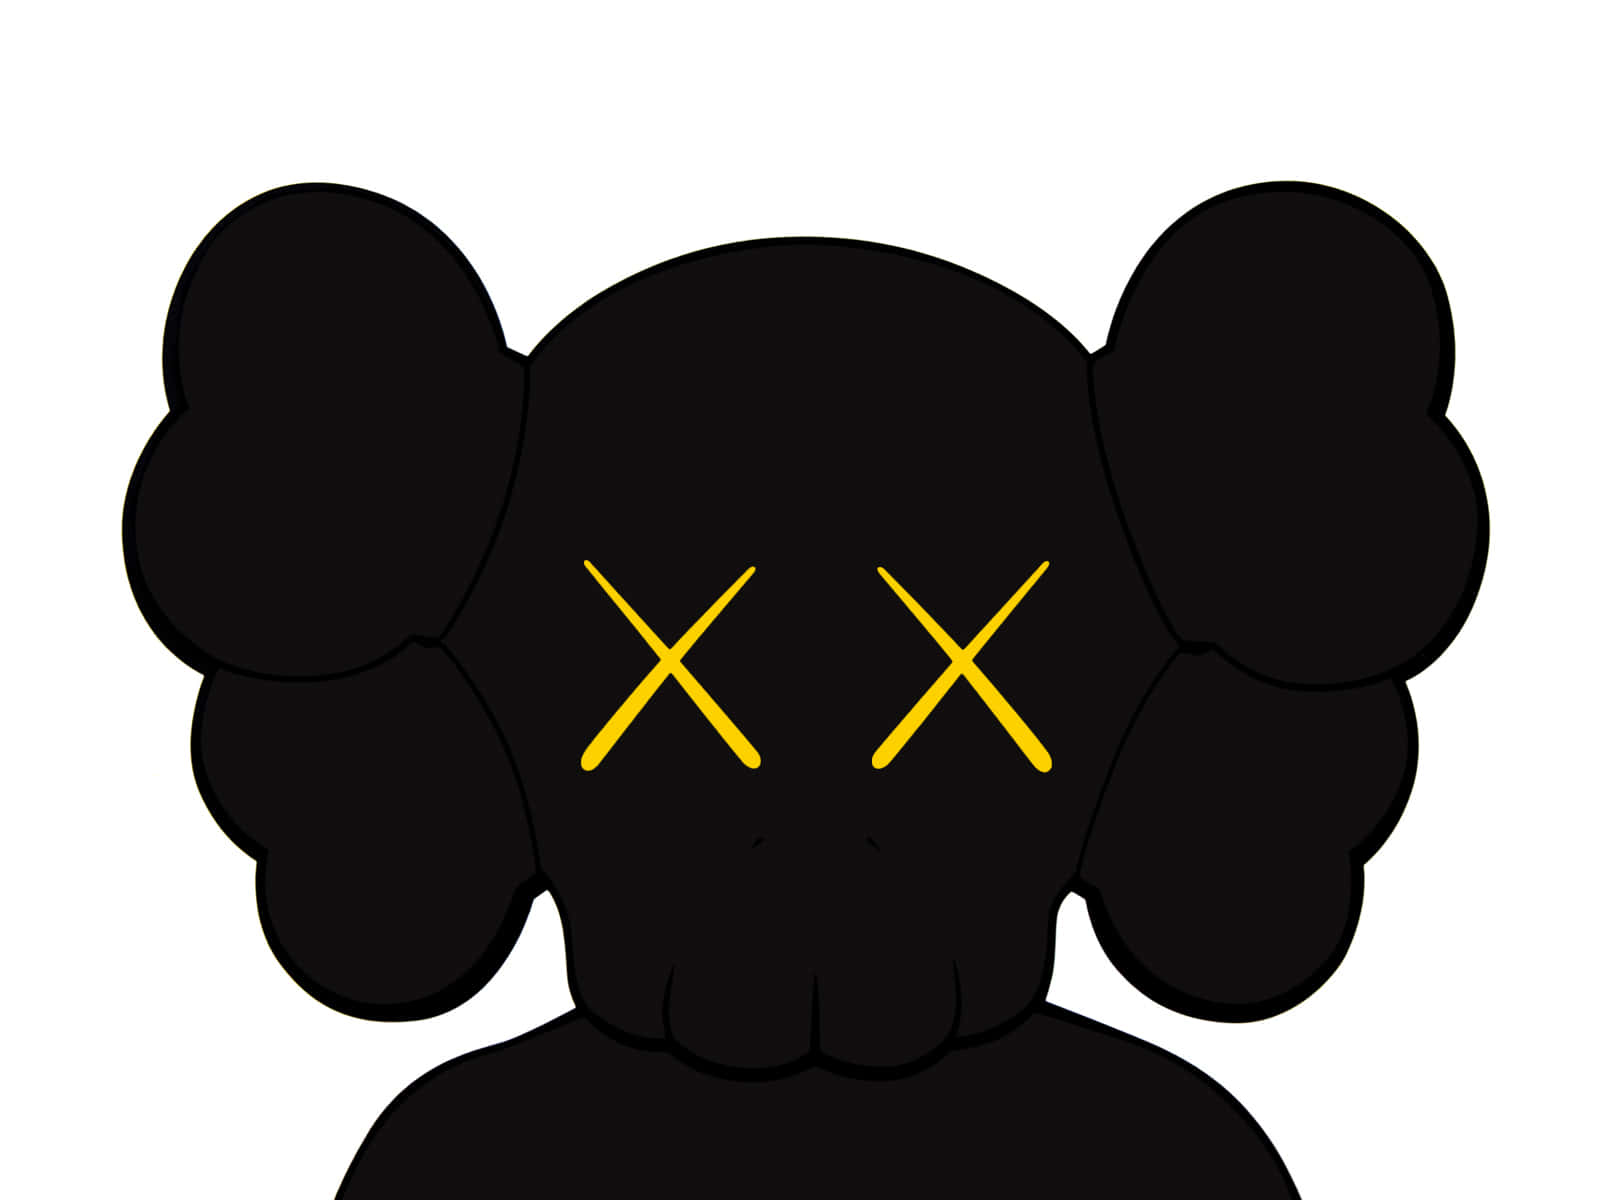 Get your hands on the newest limited-edition KAWS collectible today! Wallpaper